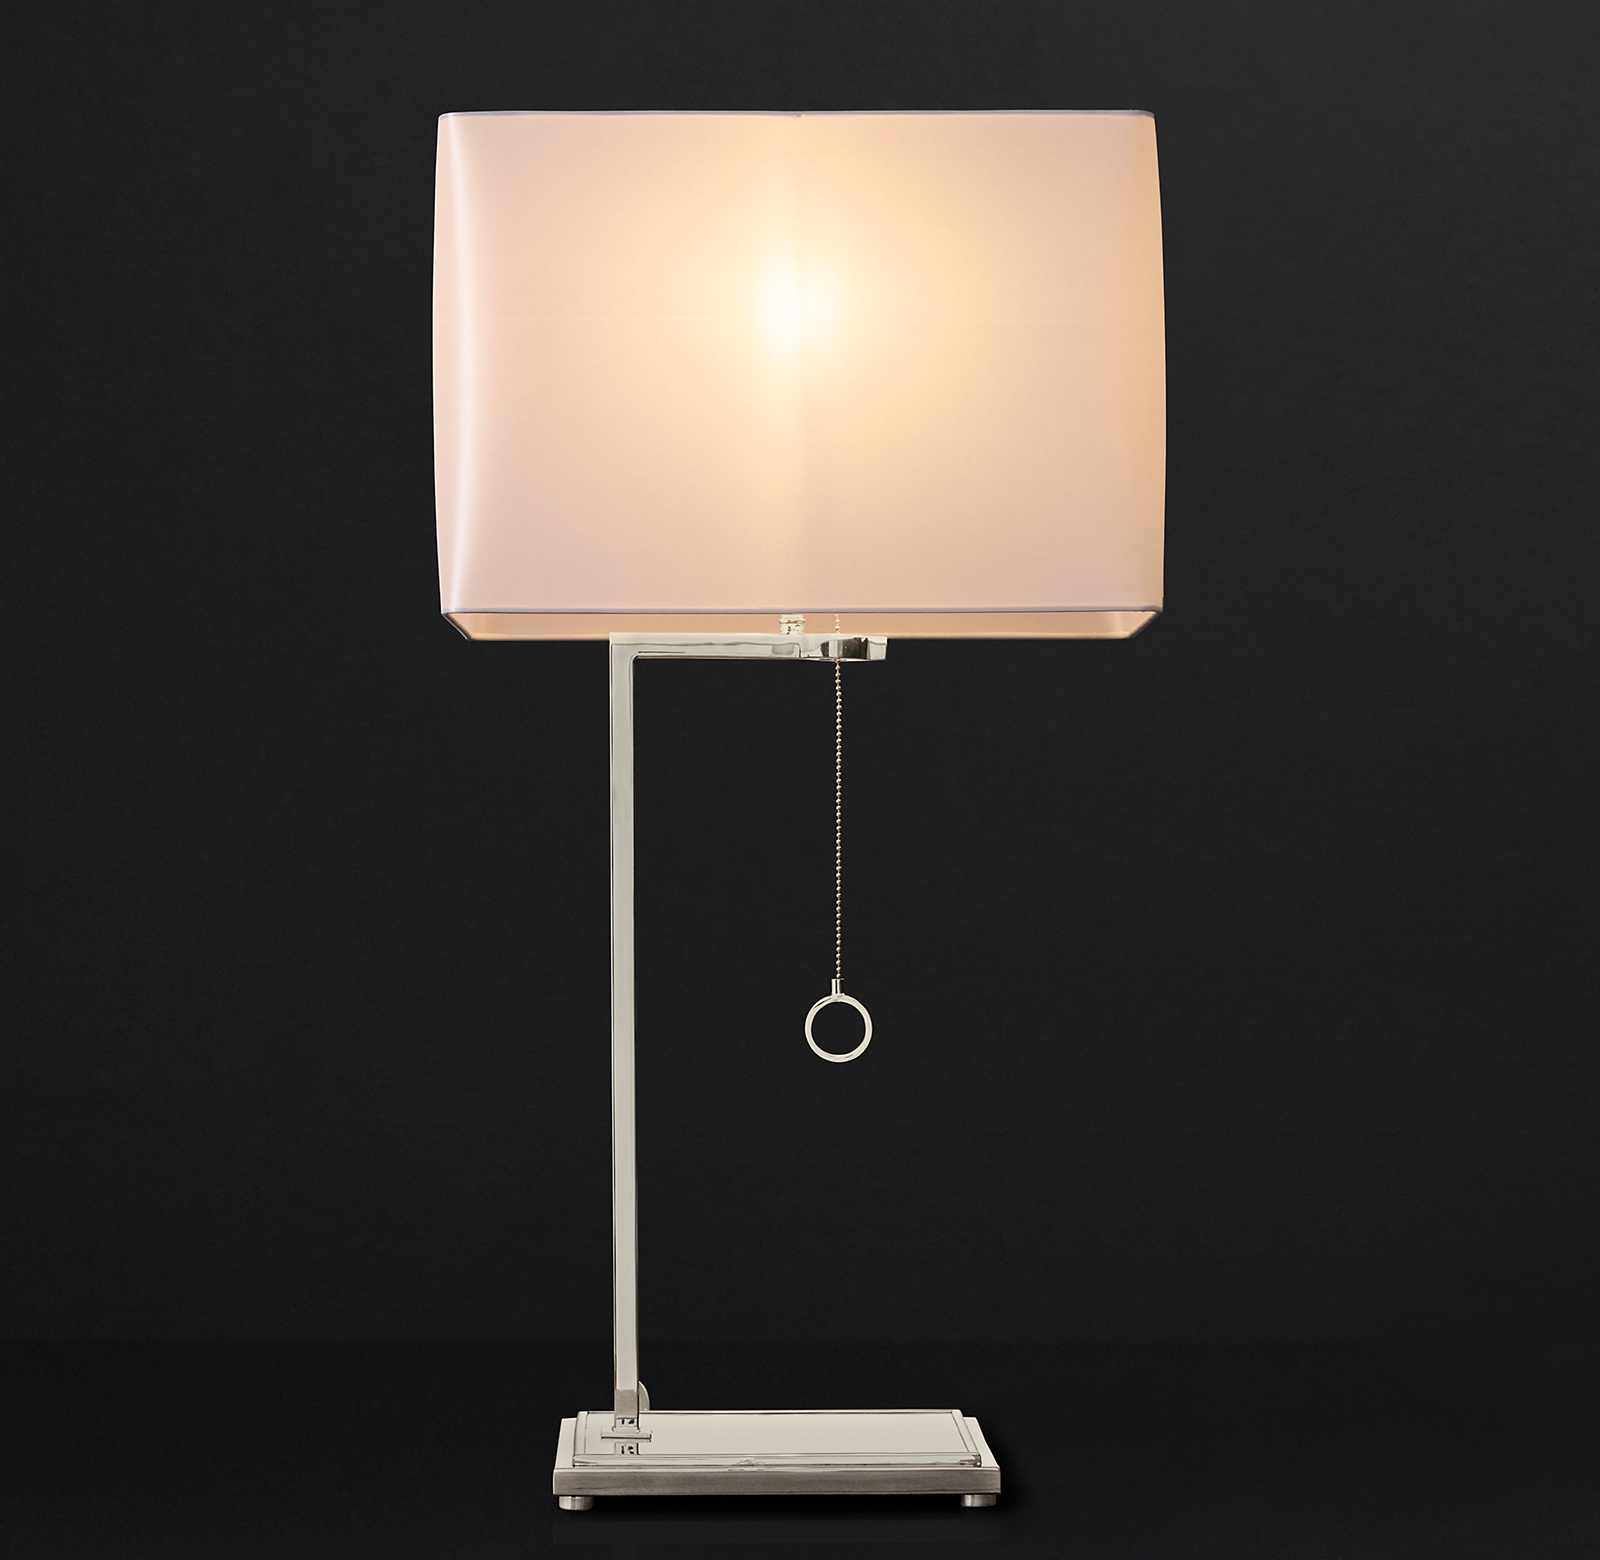 Shown in Polished Nickel with Luce Rectangular Silk Shade, size E, in White (sold separately).